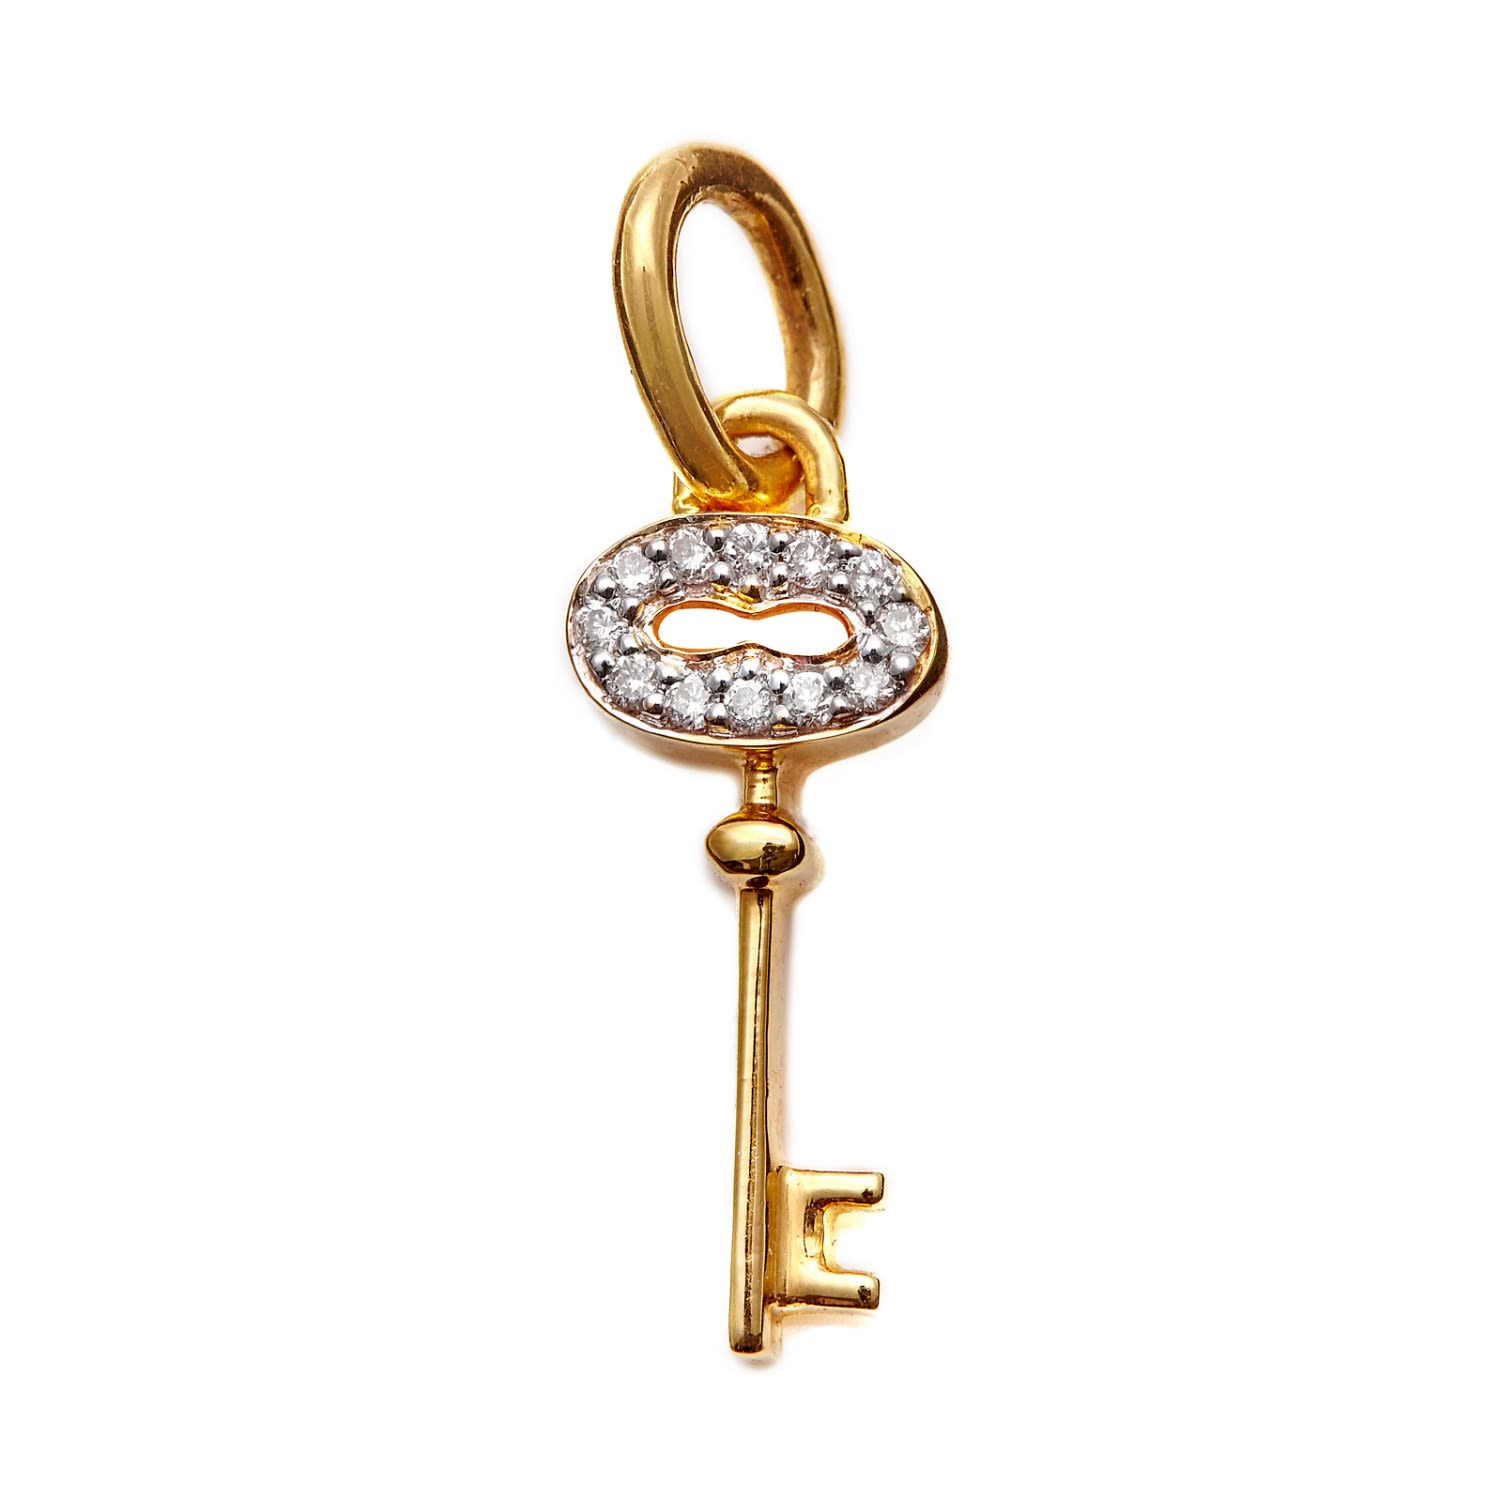 Kaizarin Women's Key To Your Dreams Pendant In Yellow Gold